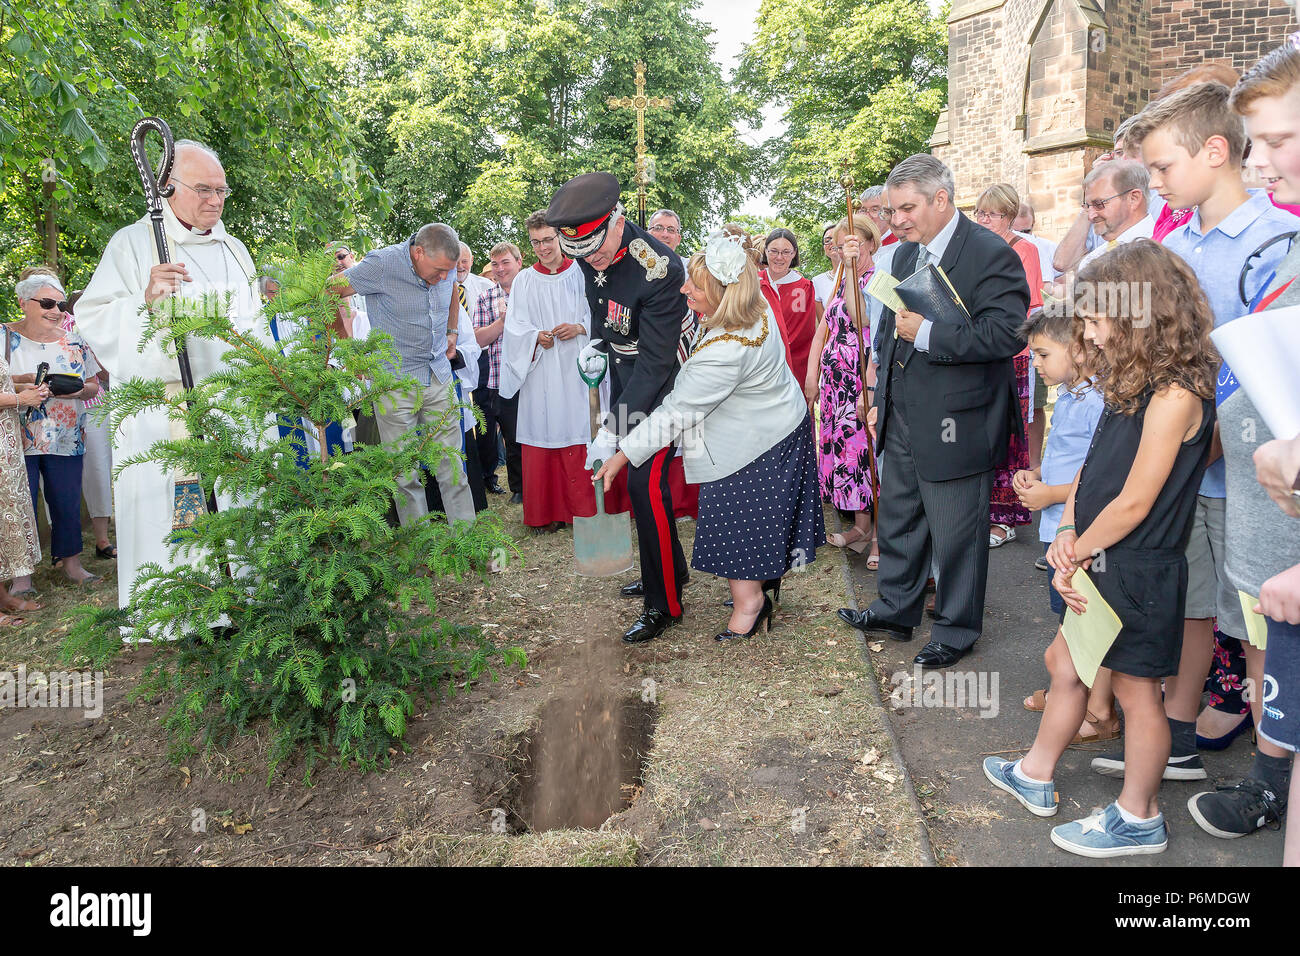 Warrington, UK. 01 July 2018 - The Finale of the Sunday service was taken outside of the church where a yew tree was planted by Cllr Karen Mundry, The Mayor of Warrington, and Thomas David Briggs, MBE, KstJ, Lord Lieutenant of Cheshire whilst the service and prayers were  held by Reverend Michael Ridley, Vicar of St Thomas' and the Rt Reverend Dr Peter Forster, Bishop of Chester Credit: John Hopkins/Alamy Live News Stock Photo